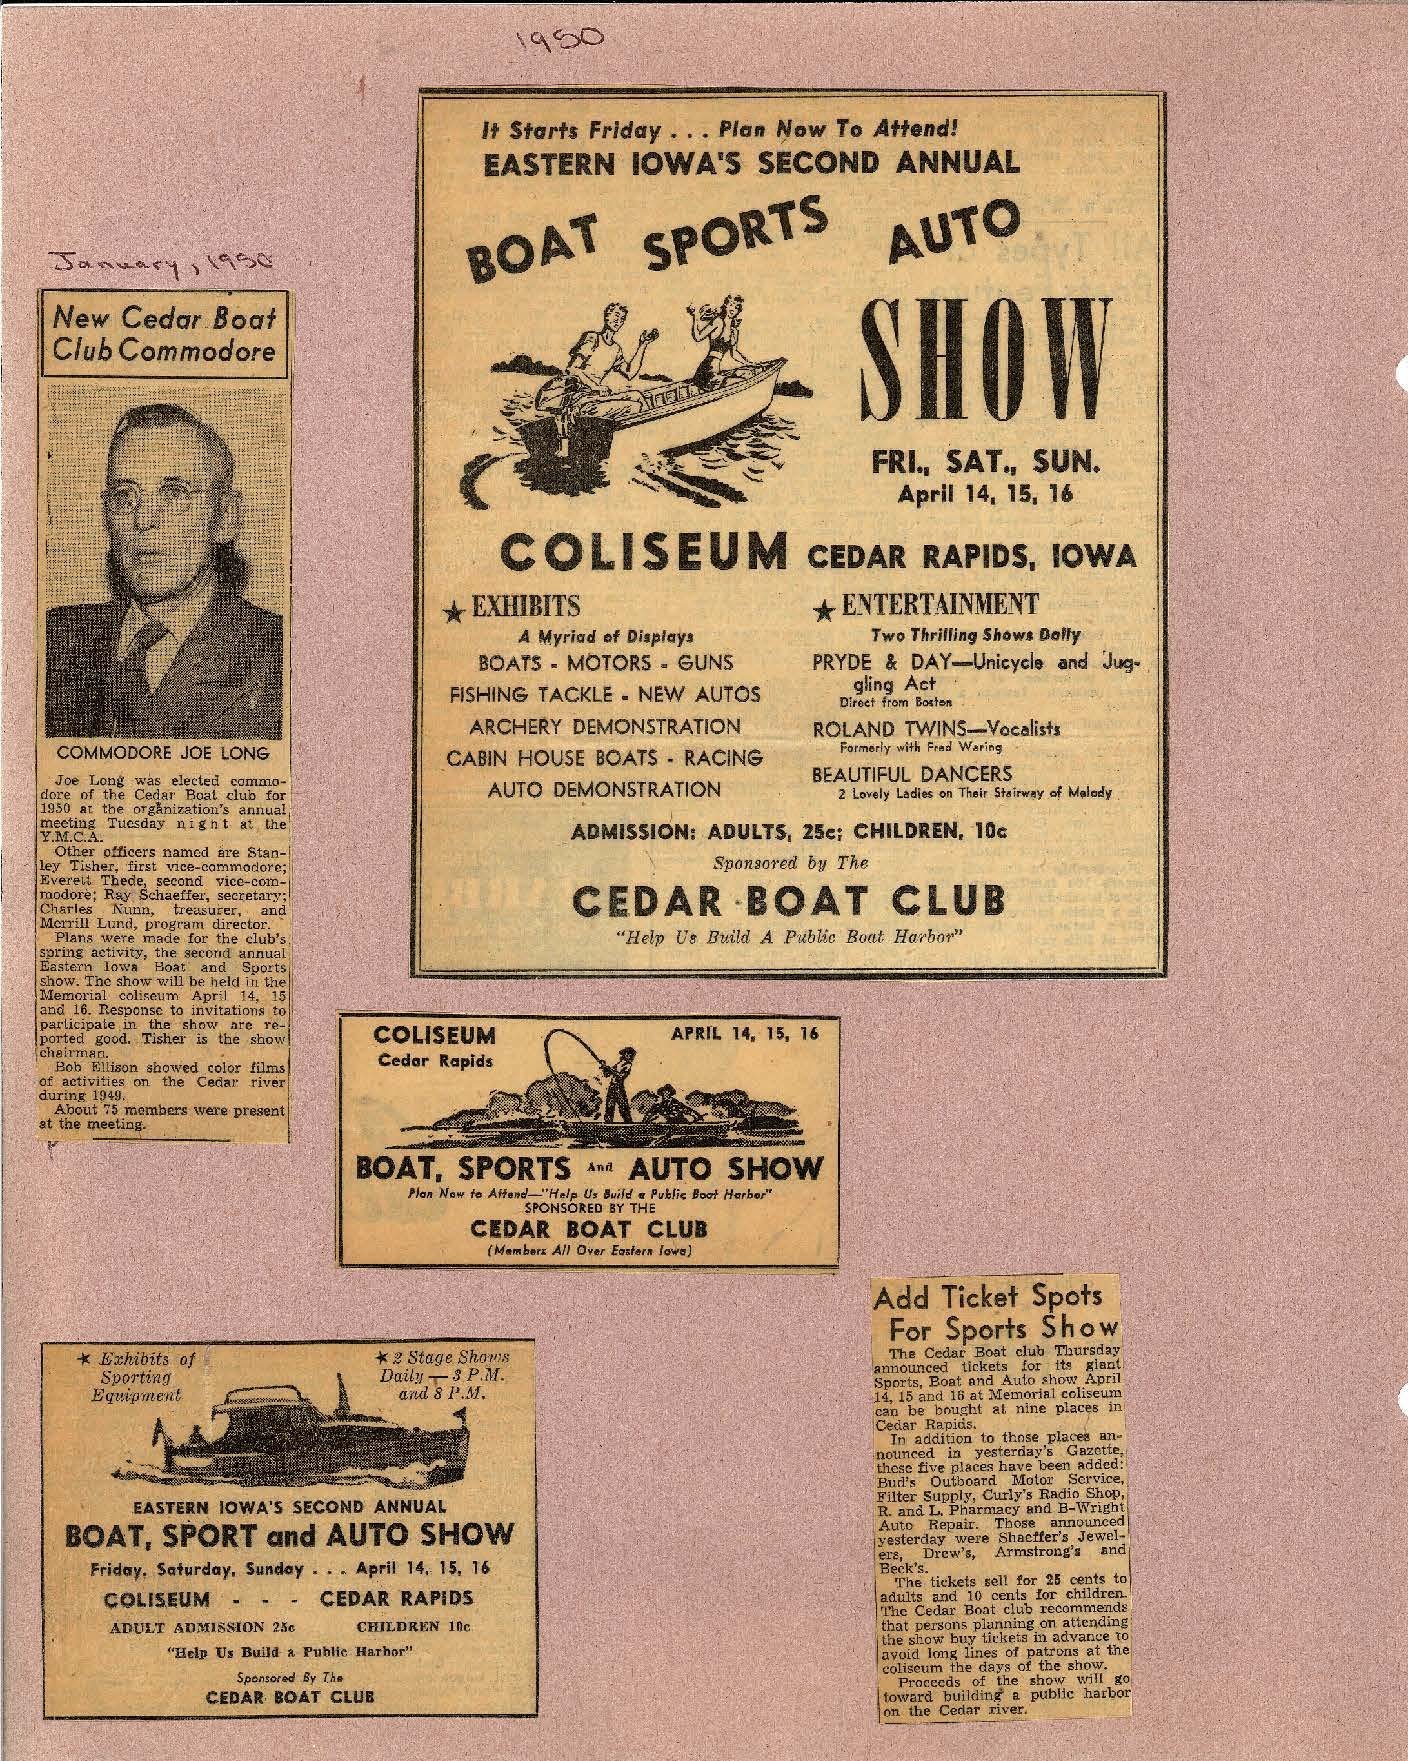 Gazette article January 1950 announcing Joe Long as Commodore and several advertisements